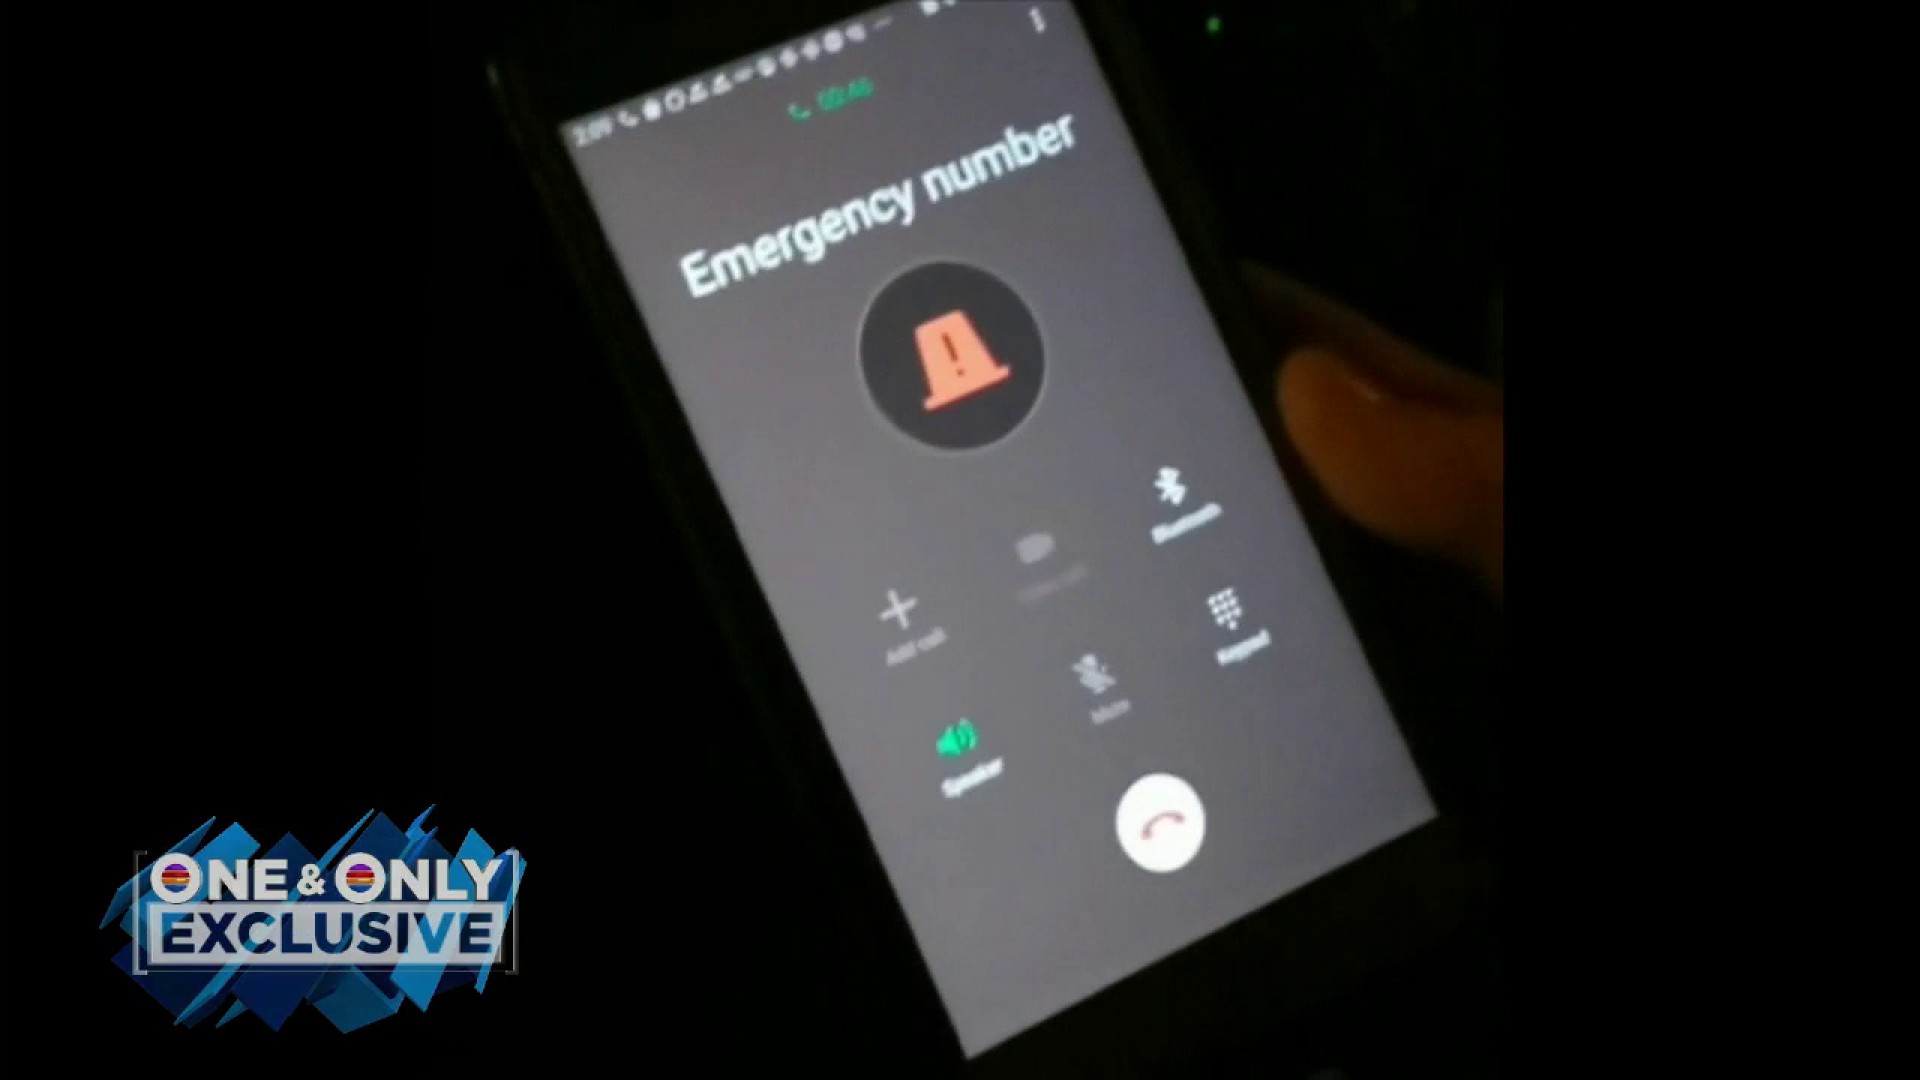 Why calling 911 from your mobile phone will divert you to 000